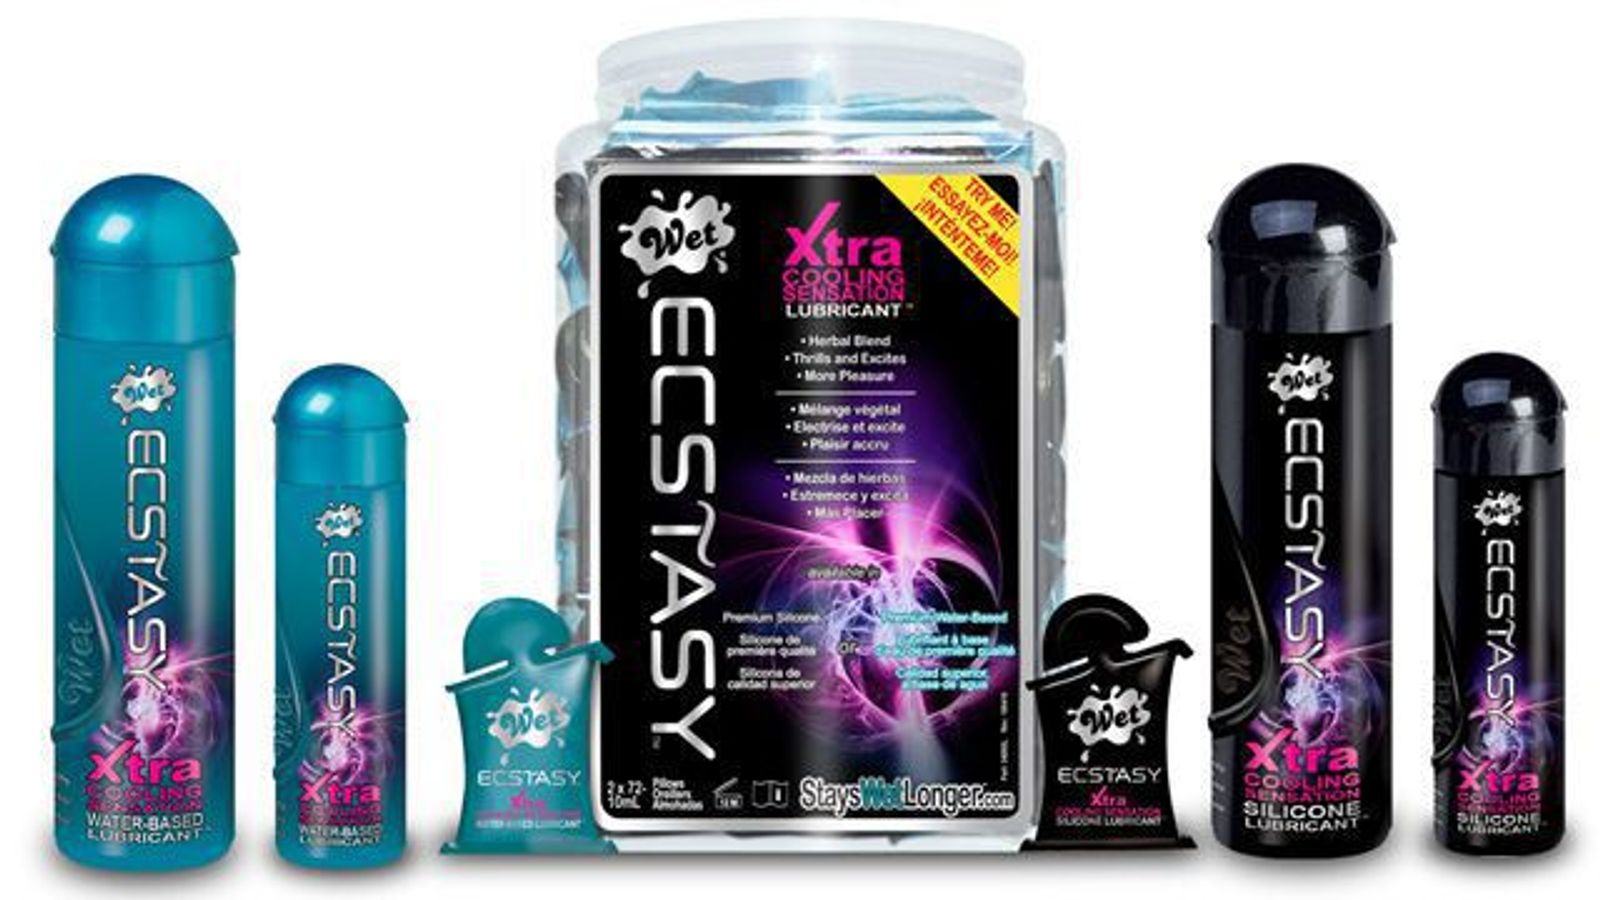 Wet Personal Lubricants Launches Contest for National Masturbation Month in May